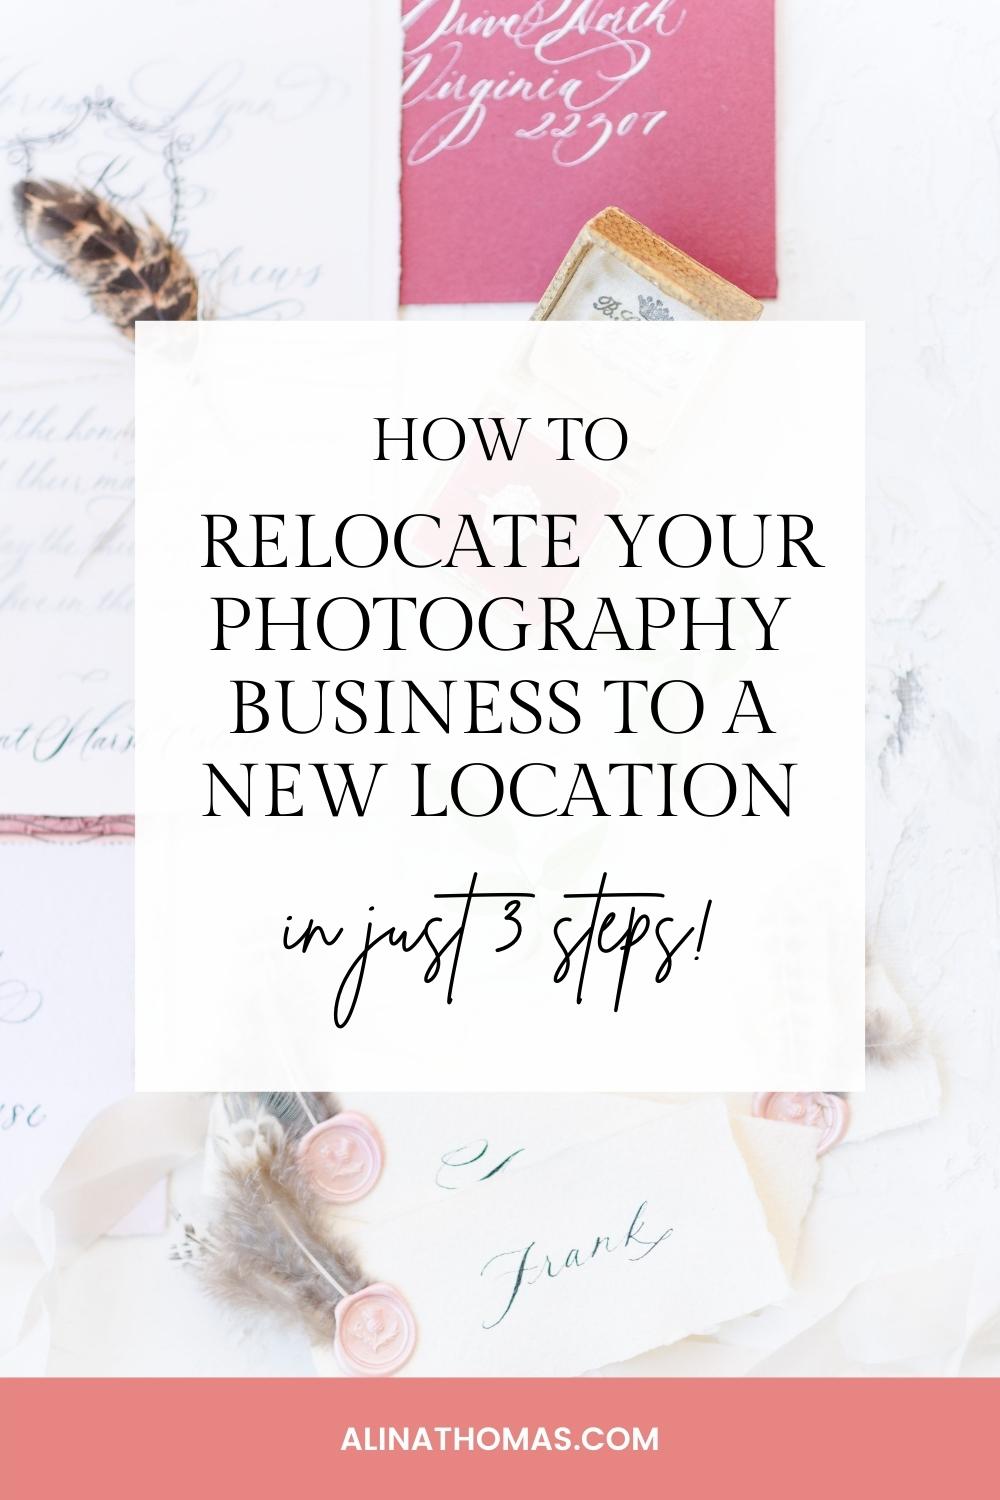 relocate your photography business in 3 steps